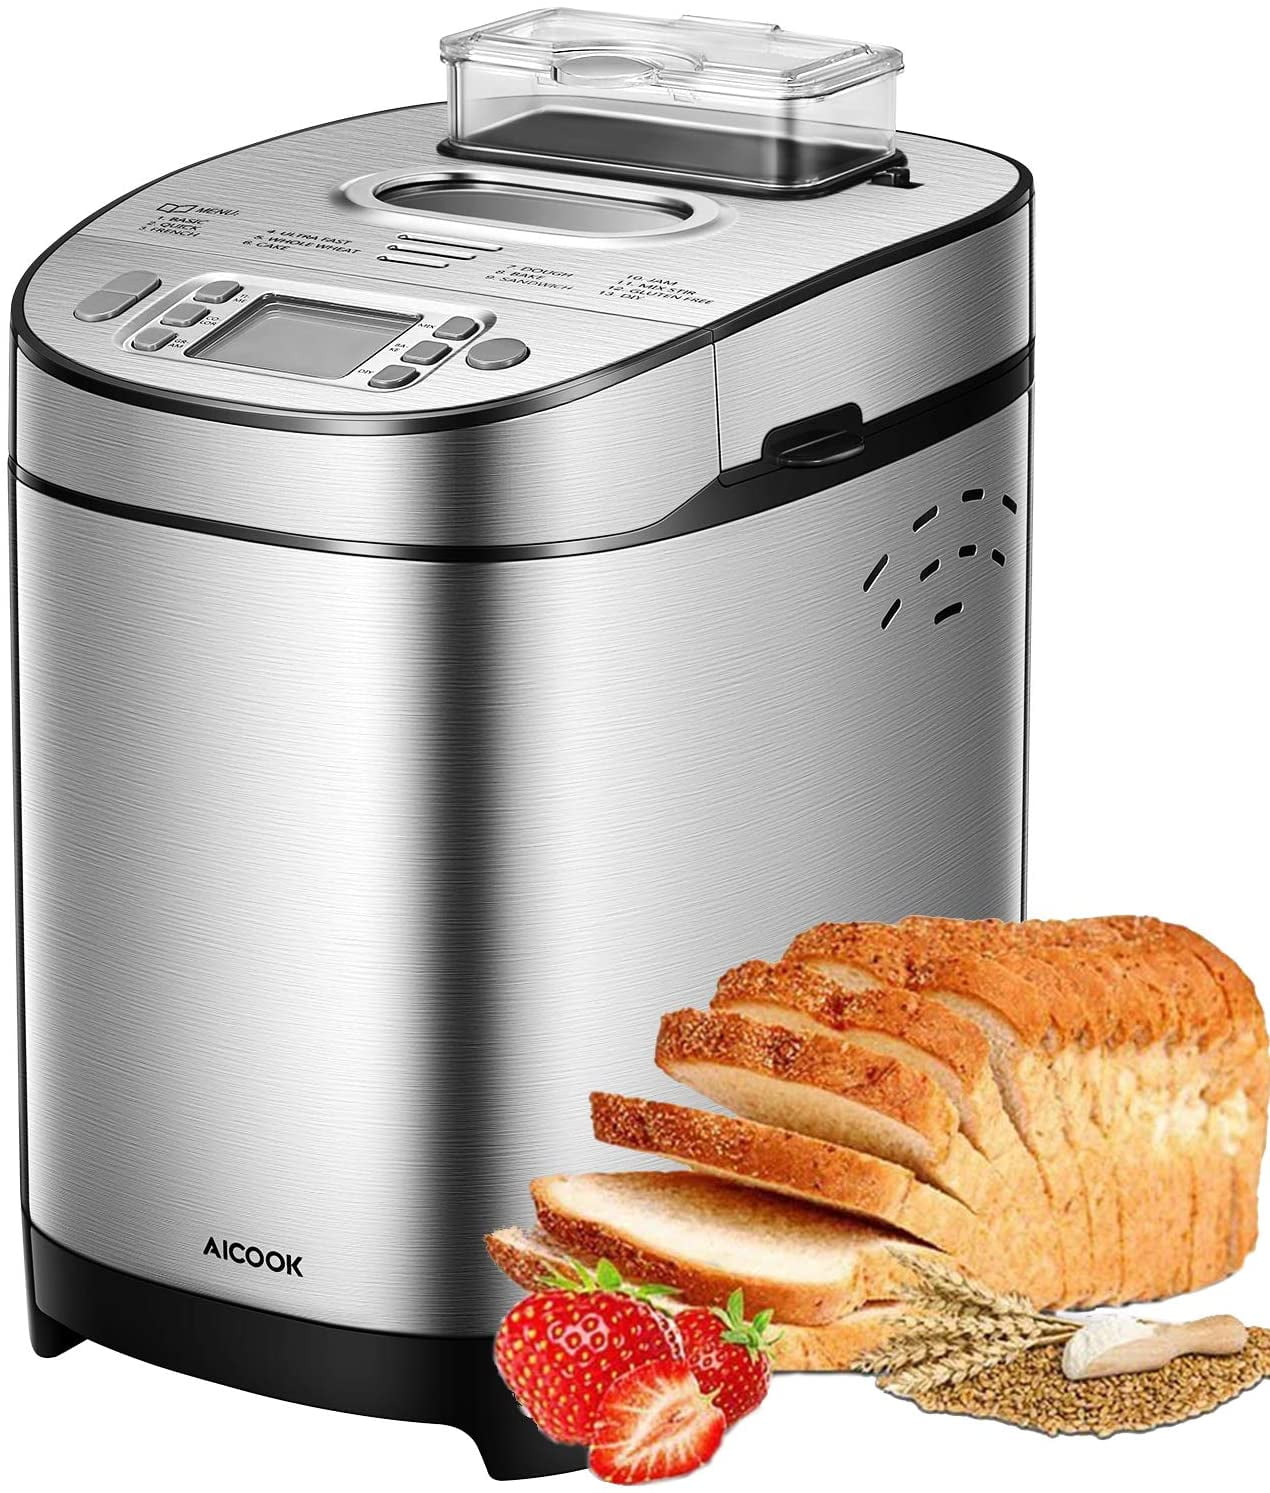 15in1 Programmable Bread Maker with LCD Screen Renewed 1 Hour Keep Warm Set Memory Function Nonstick Ceramic Bread Machine- CSS Stainless Steel Bread Maker 2LB Clear Recipes 3 Loaf Sizes for Home Bakery 